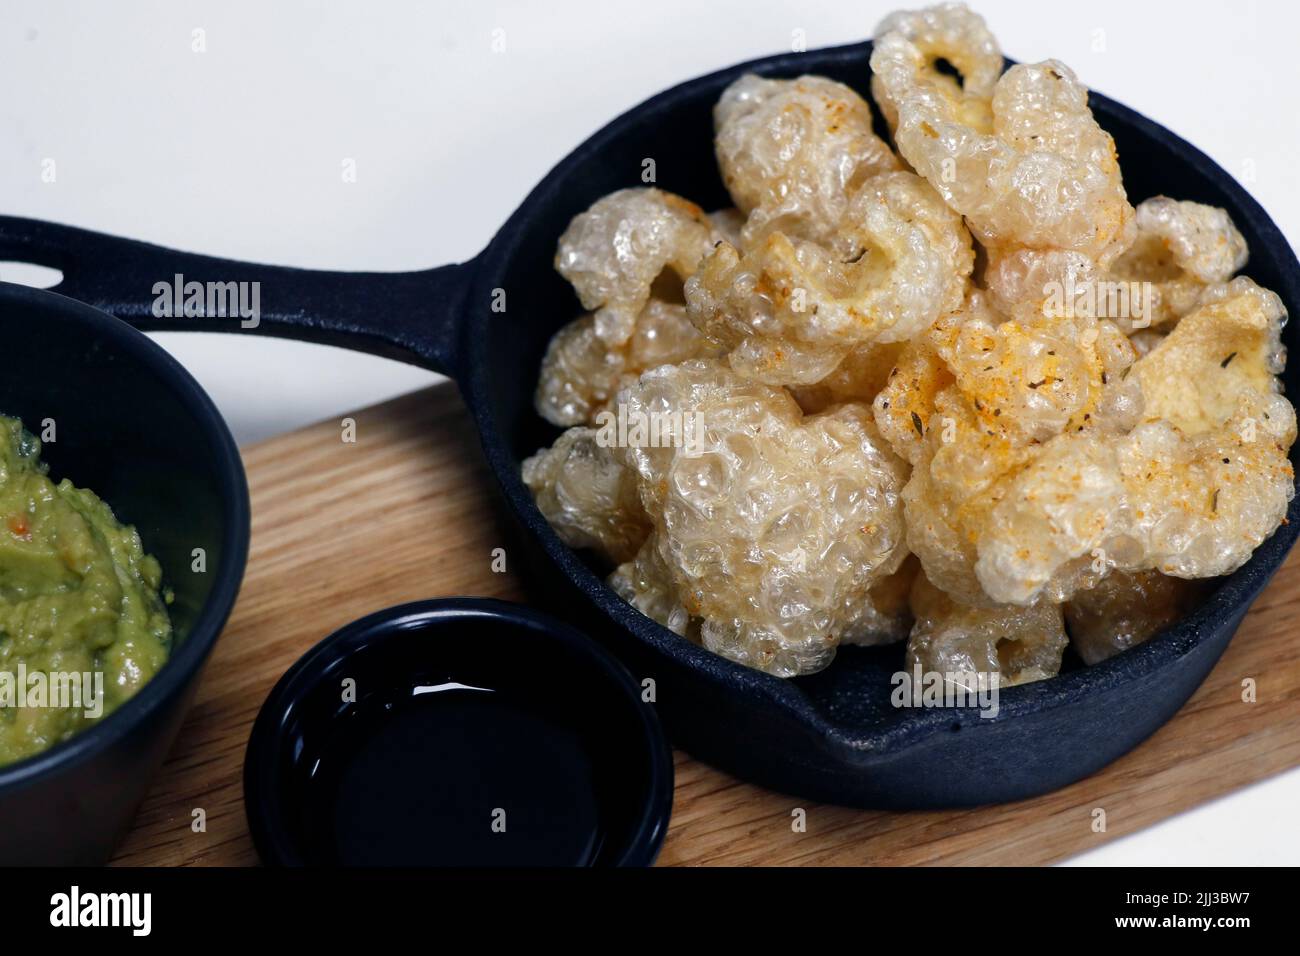 sun dried and deep fat fryer crispy pork skin known as chicharon in a serving dish, filipino delicacy food Stock Photo